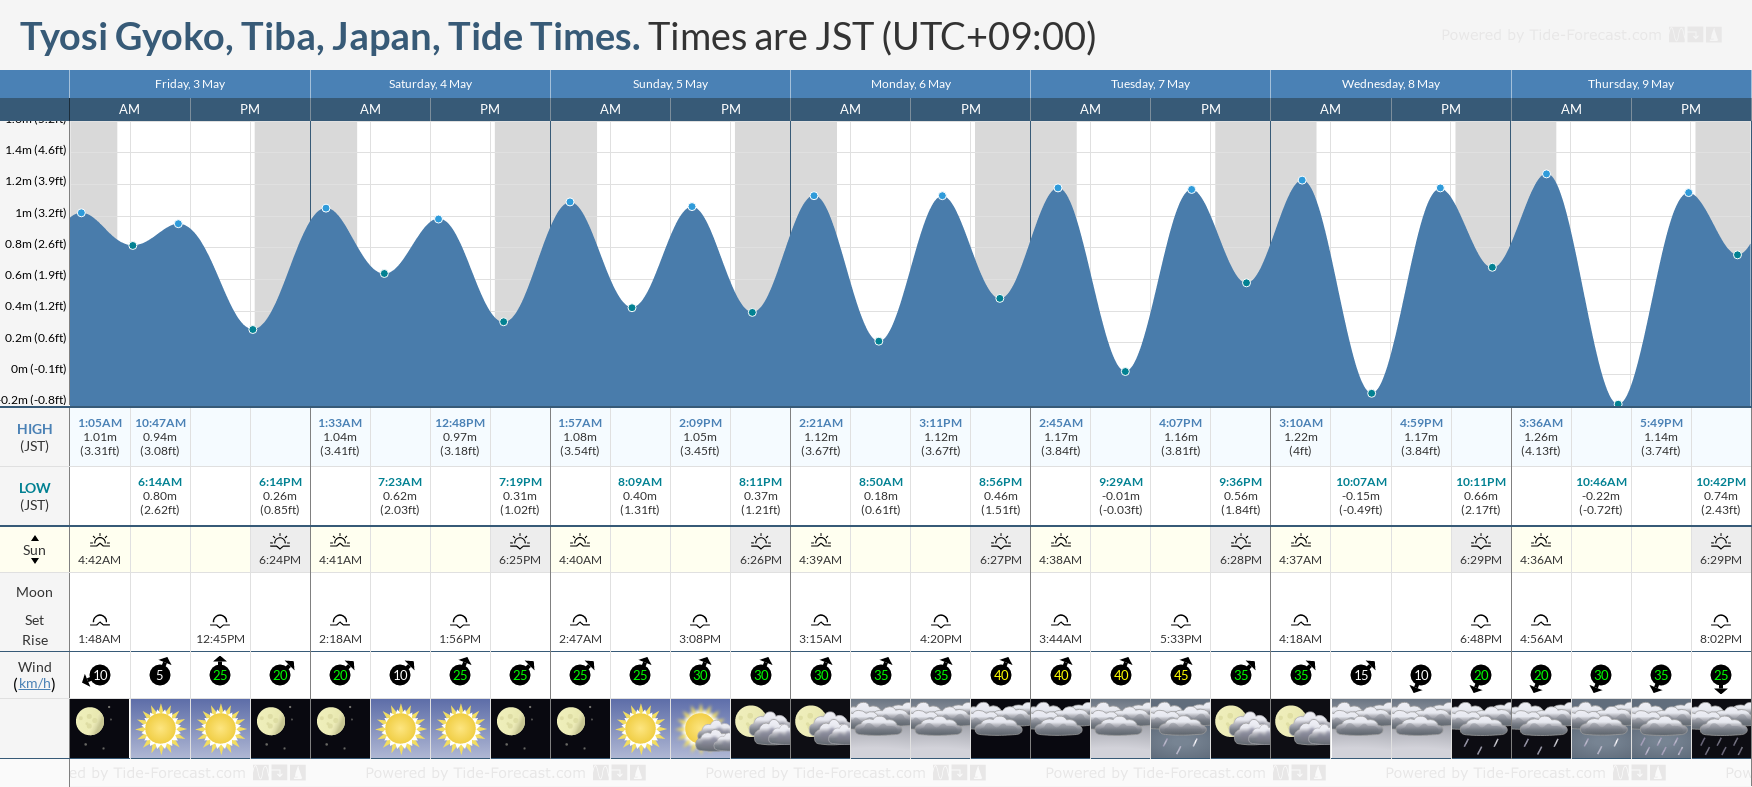 Tyosi Gyoko, Tiba, Japan Tide Chart including high and low tide tide times for the next 7 days